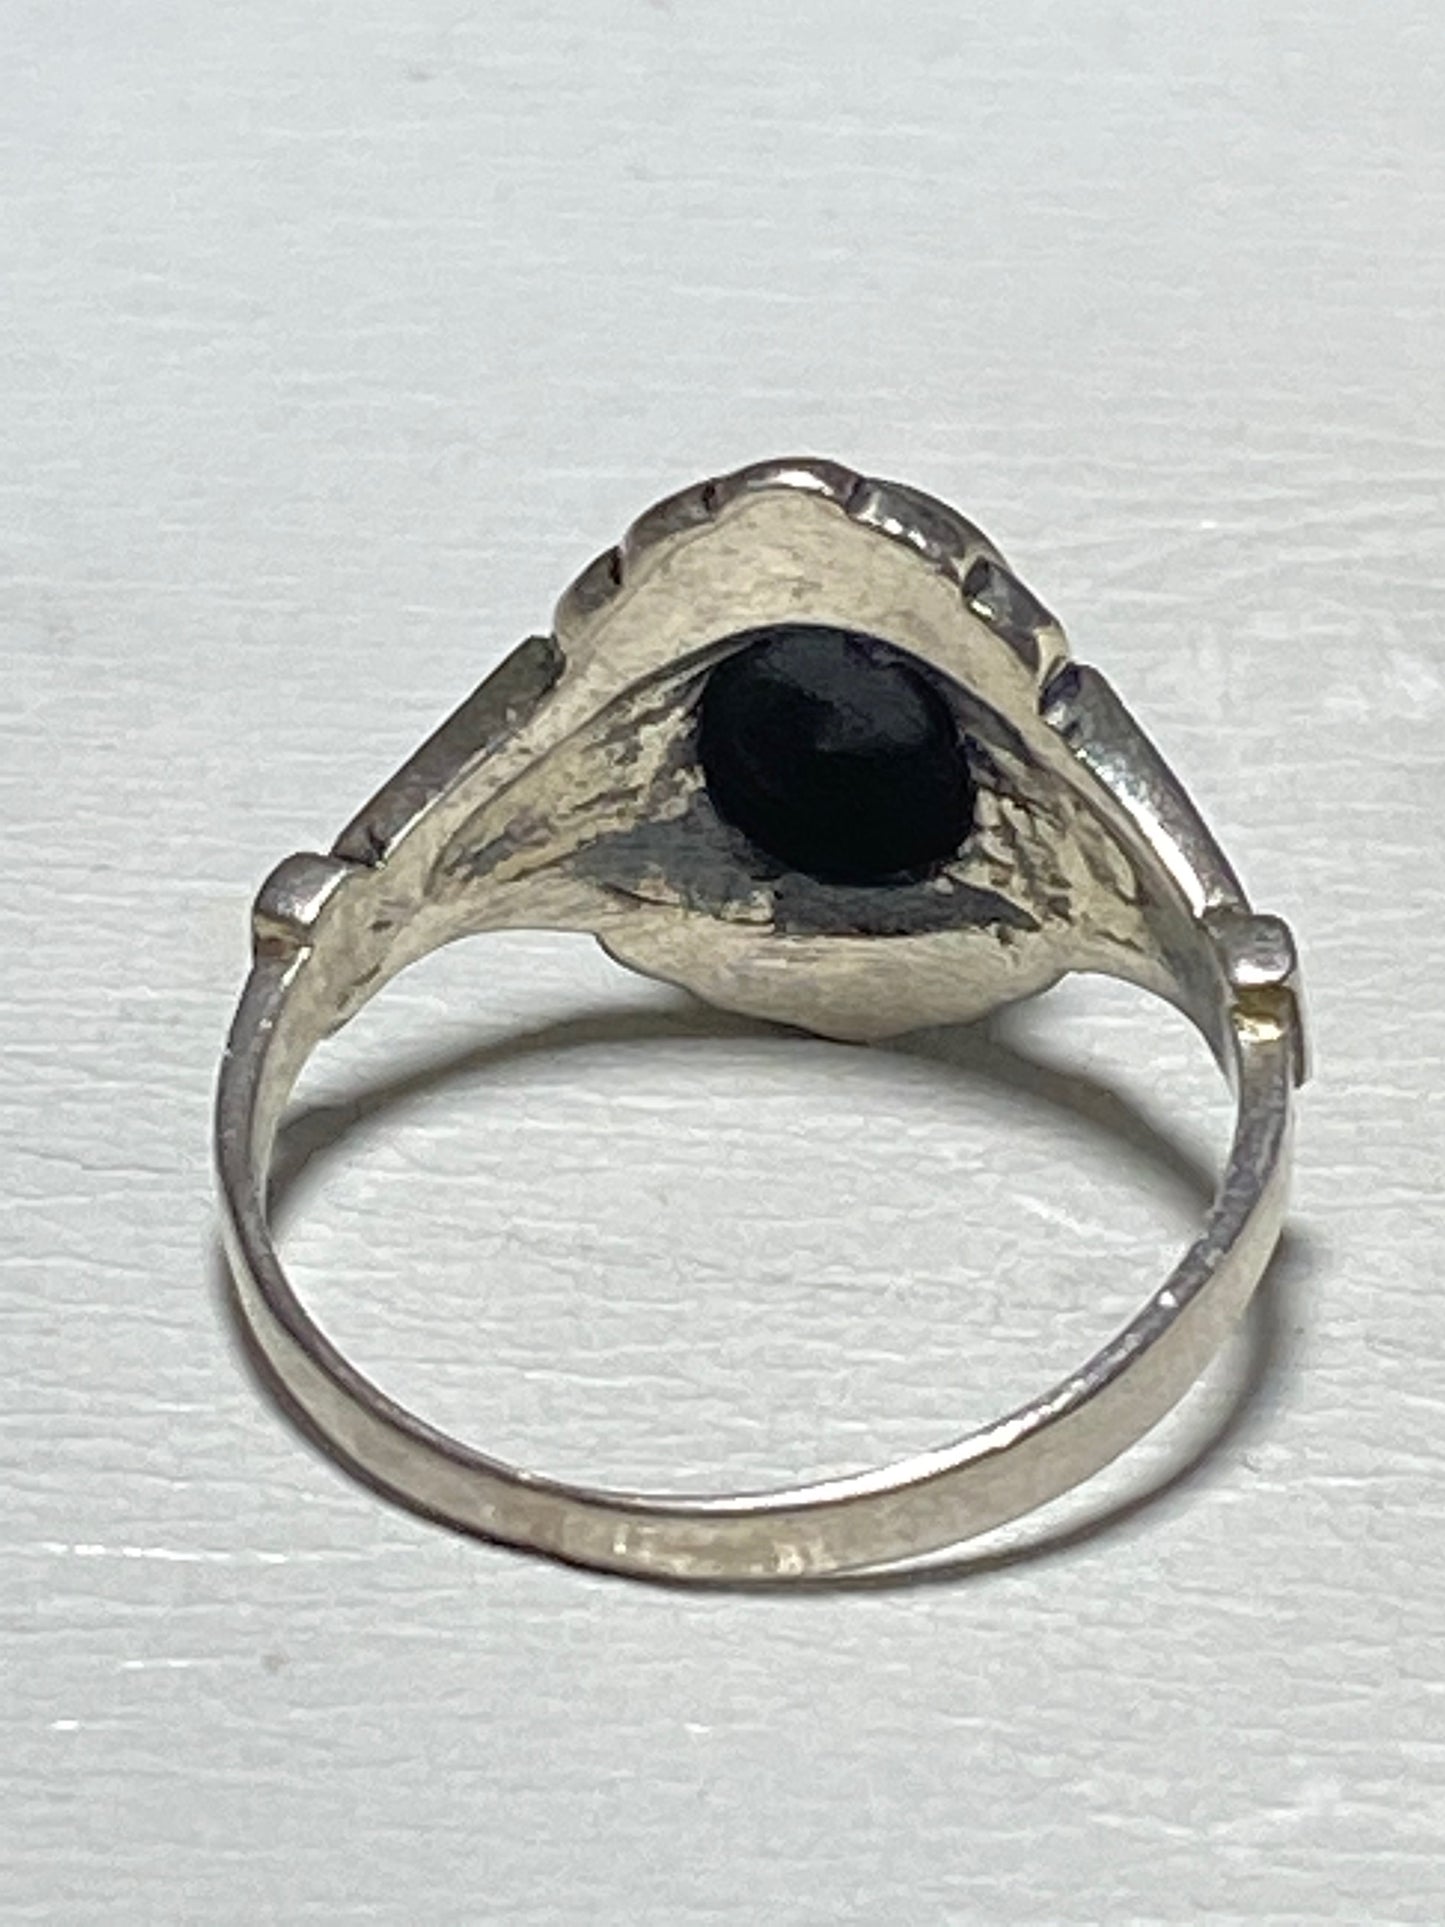 Onyx Ring marcasite mourning sterling silver women